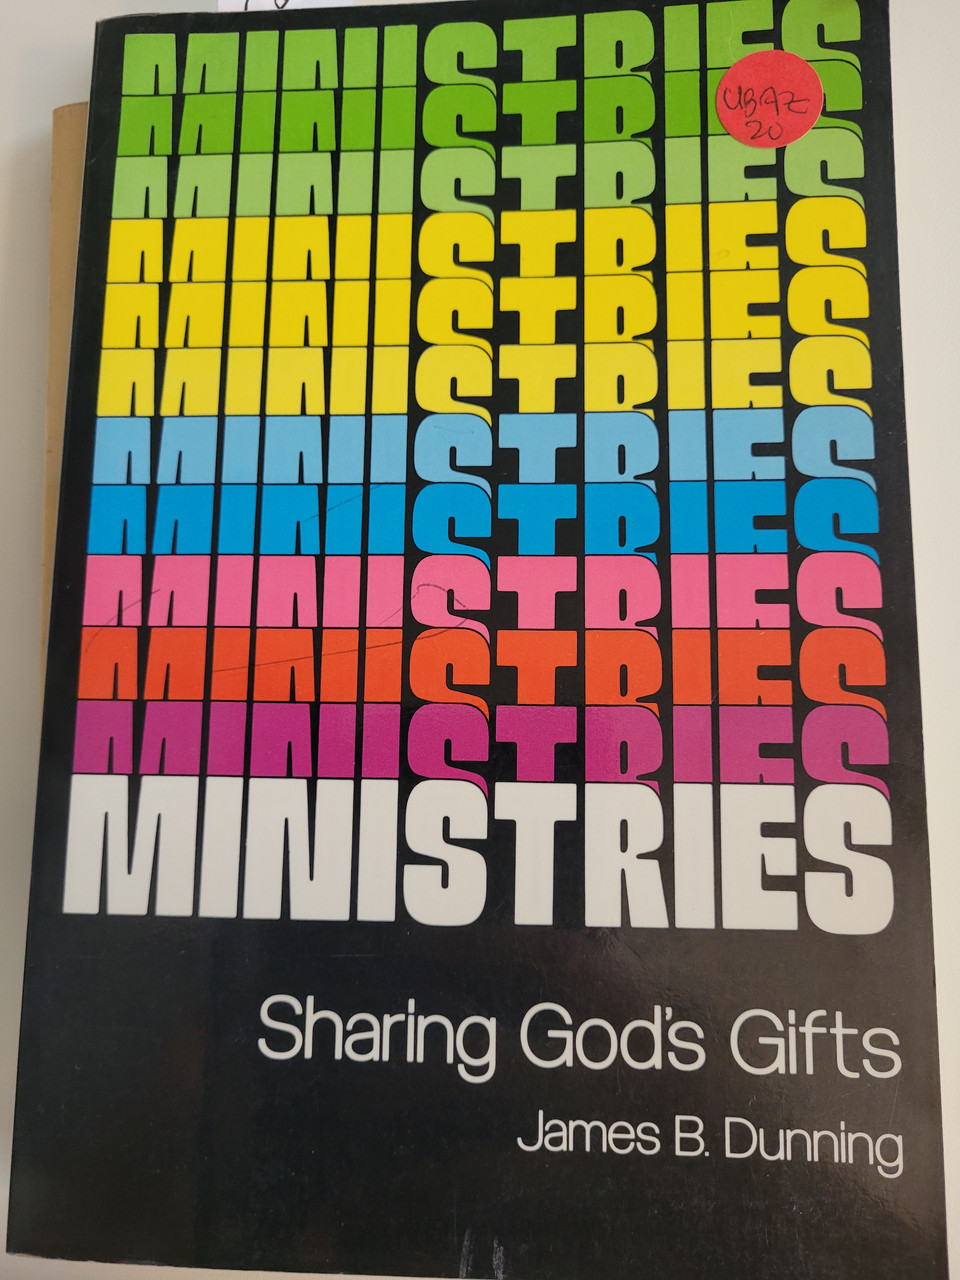 Ministries Sharing God's Gifts by James B. Dunning